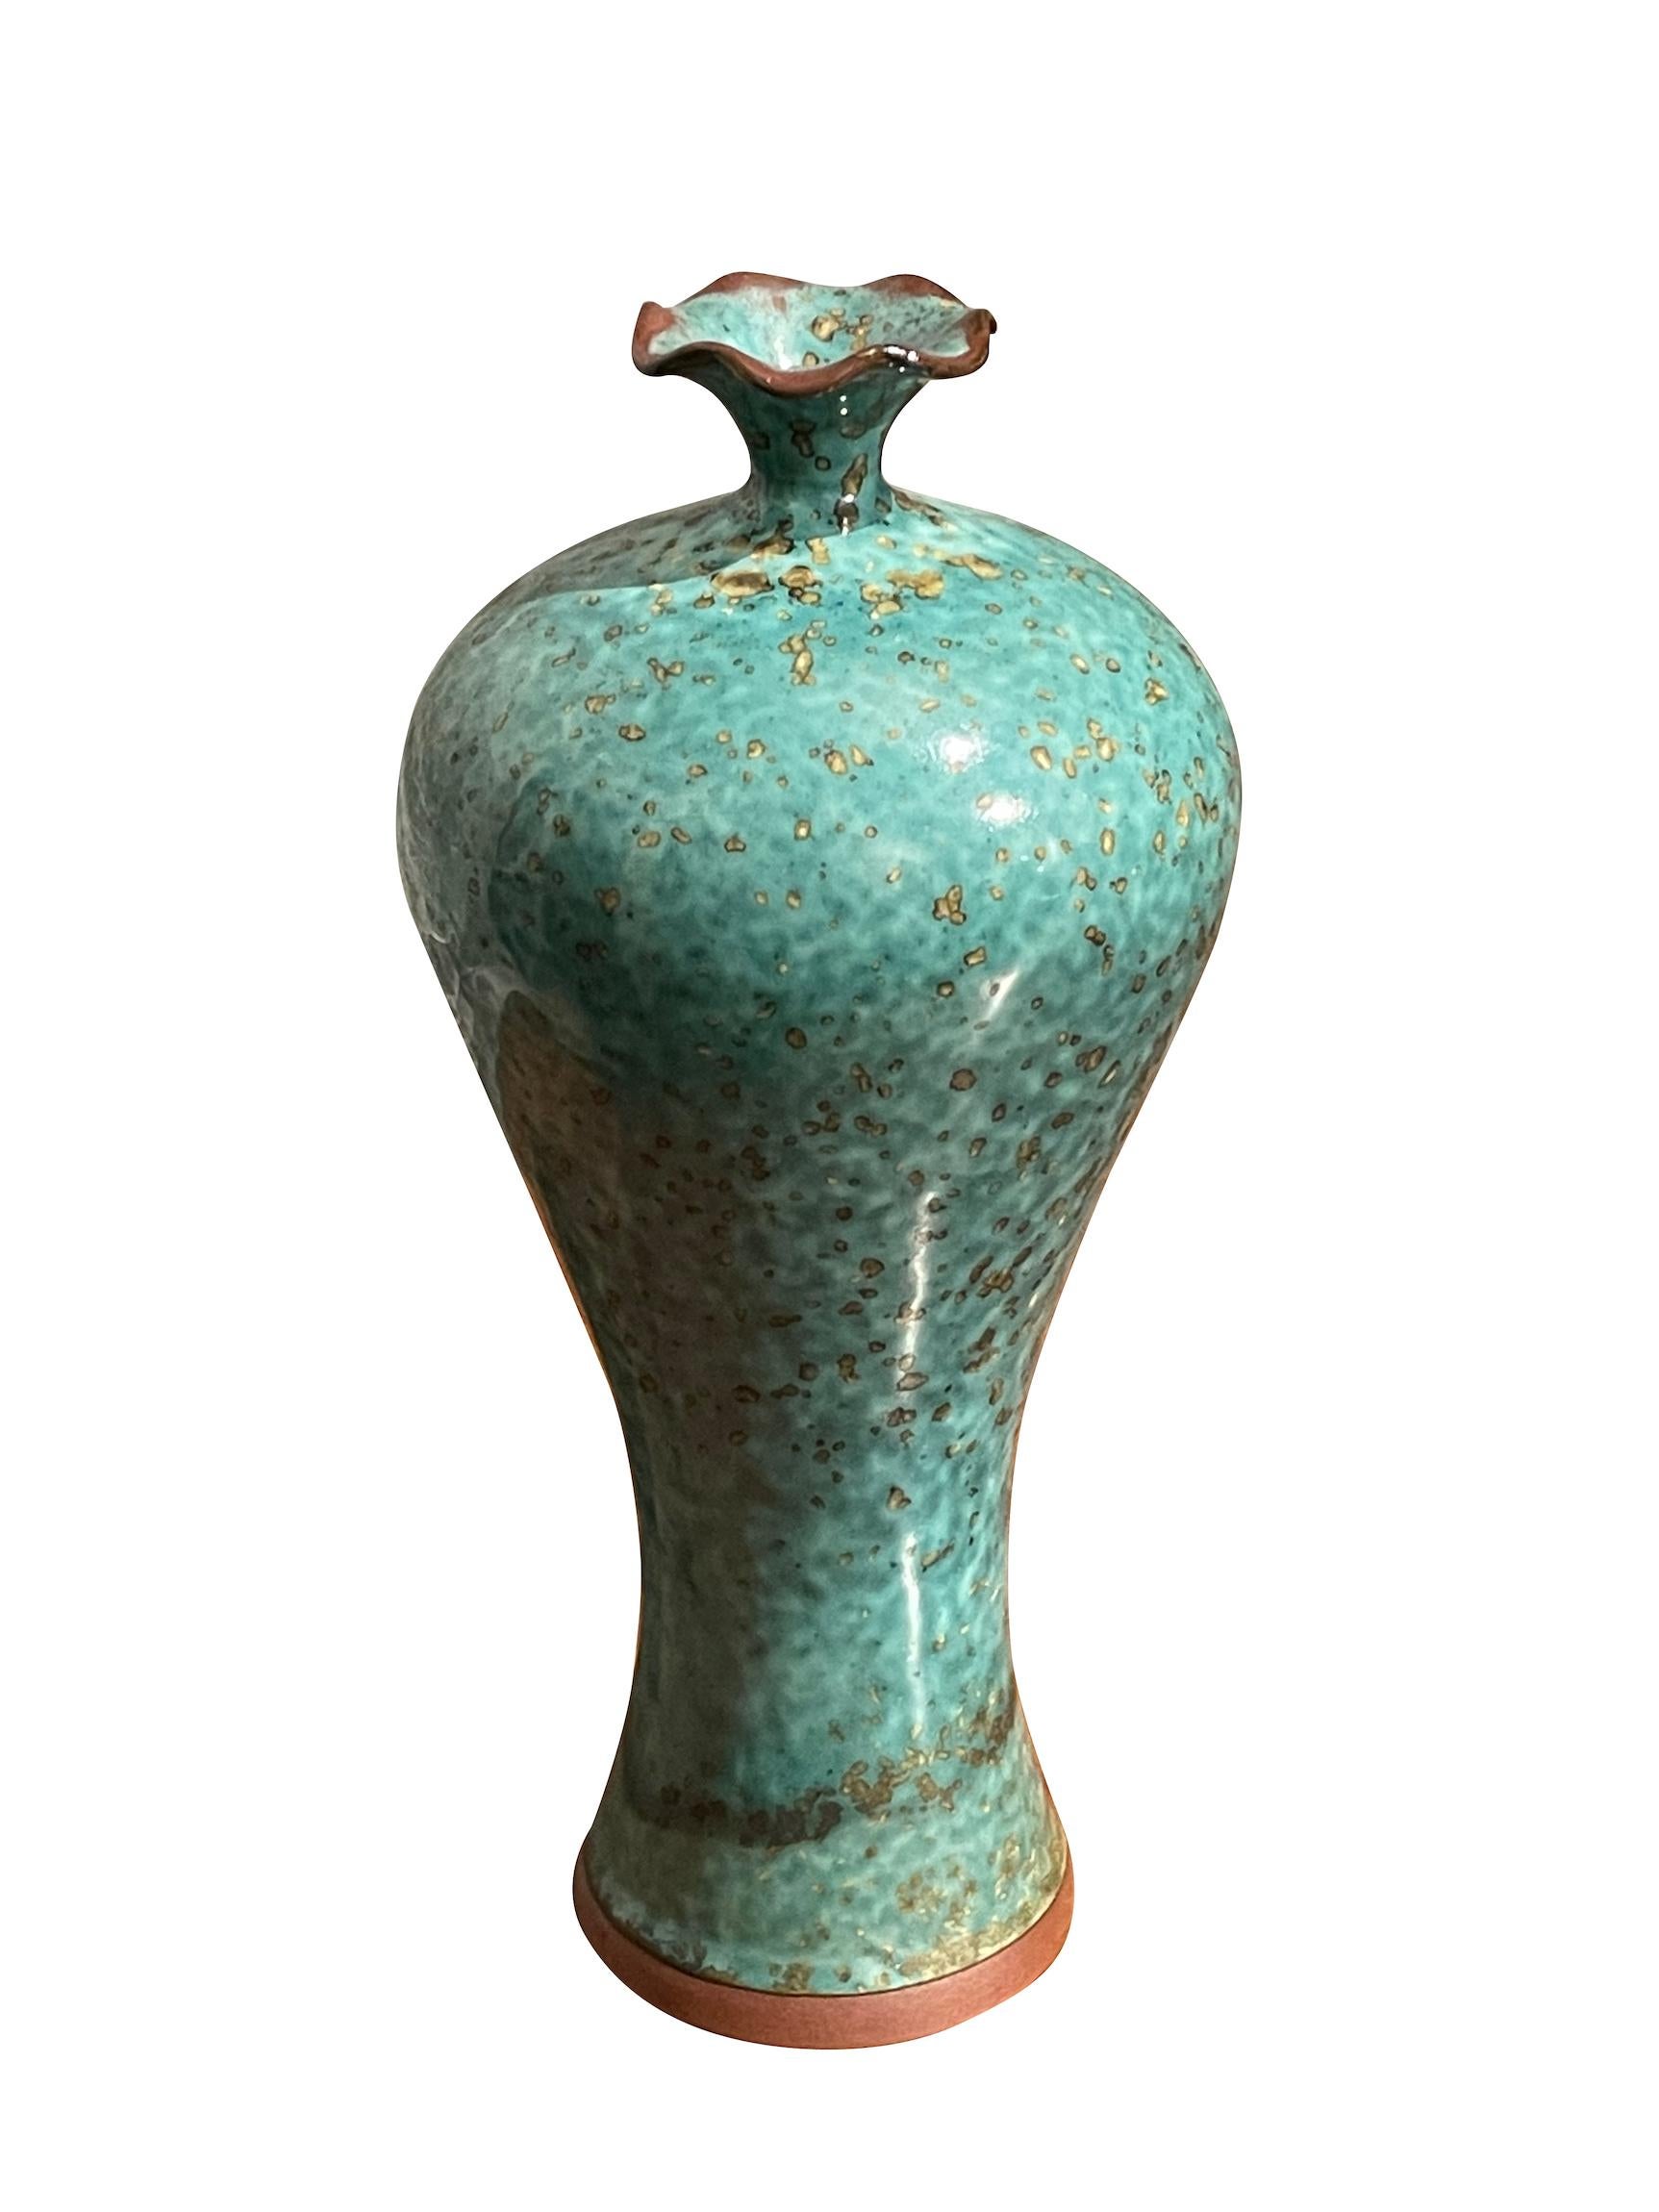 Contemporary Chinese turquoise with gold speckled glaze vase.
Classic shape with scalloped design spout opening.
Two available and sold individually.
One of several pieces from a large collection.
ARRIVING MARCH